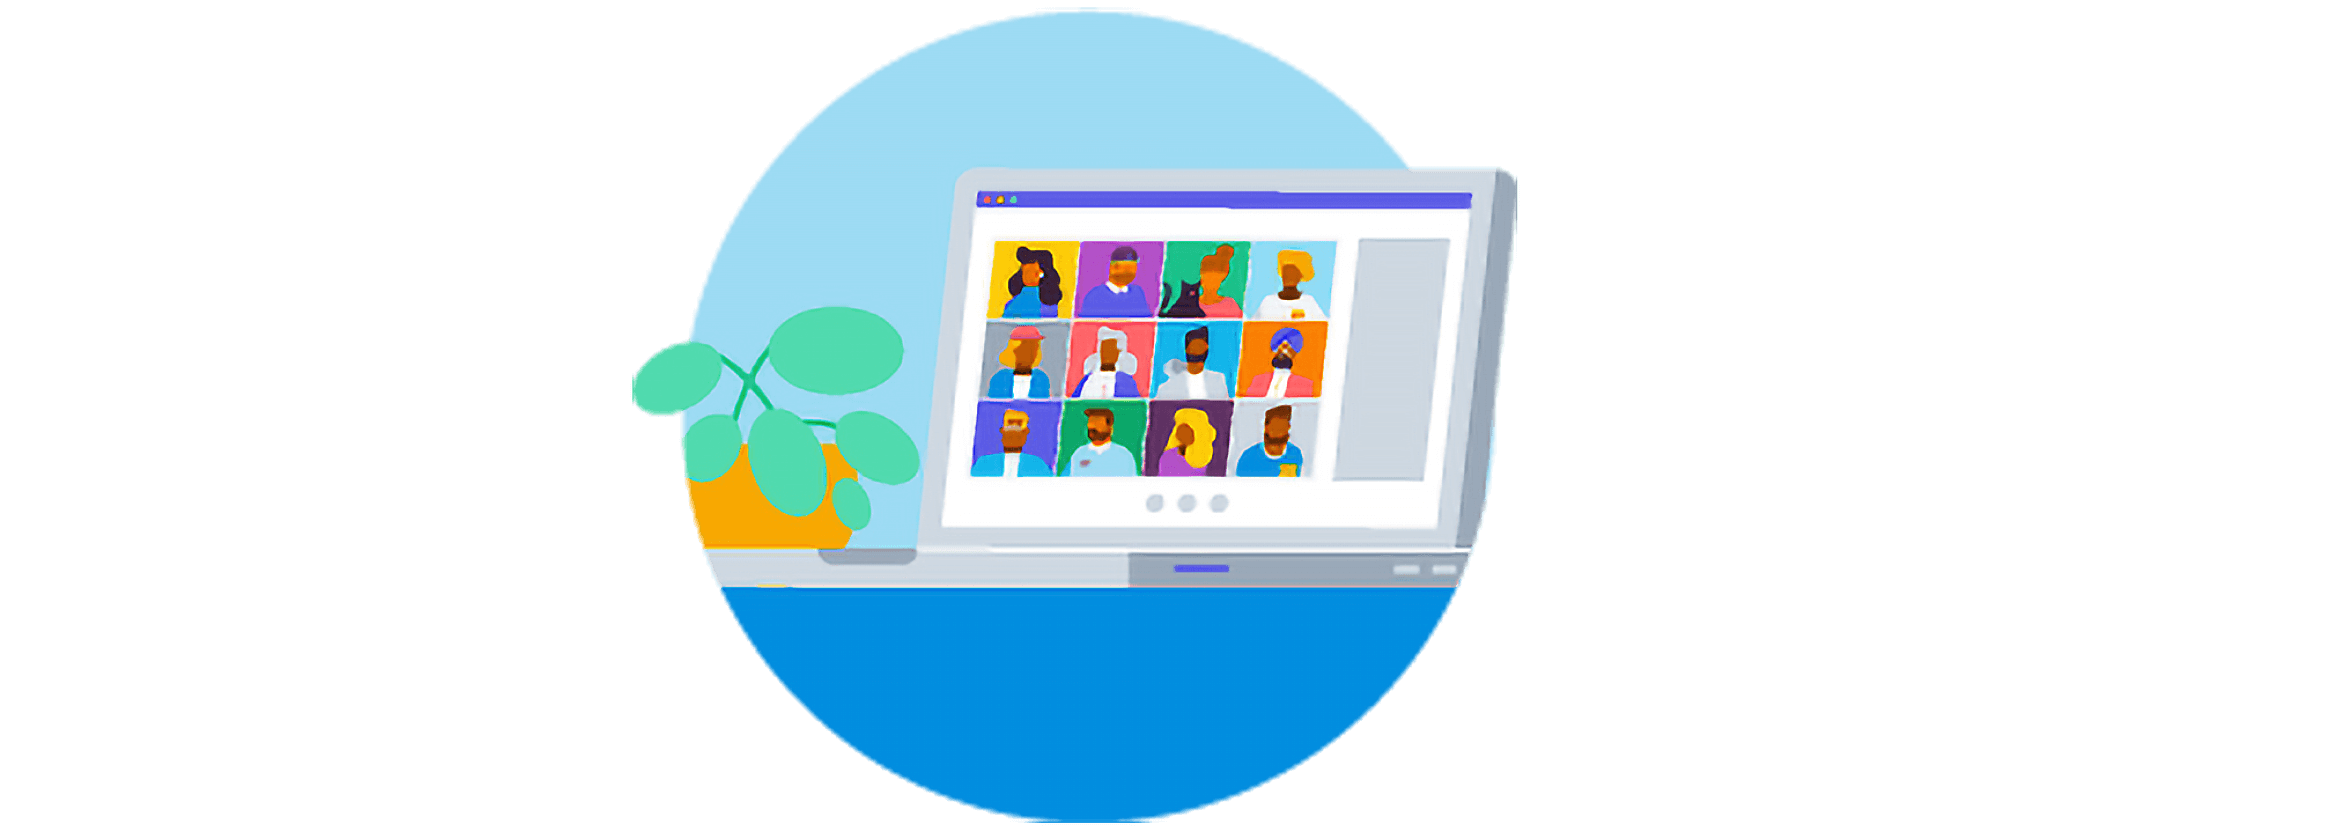 An illustrated screen of a laptop showing participants taking part in a virtual meeting.